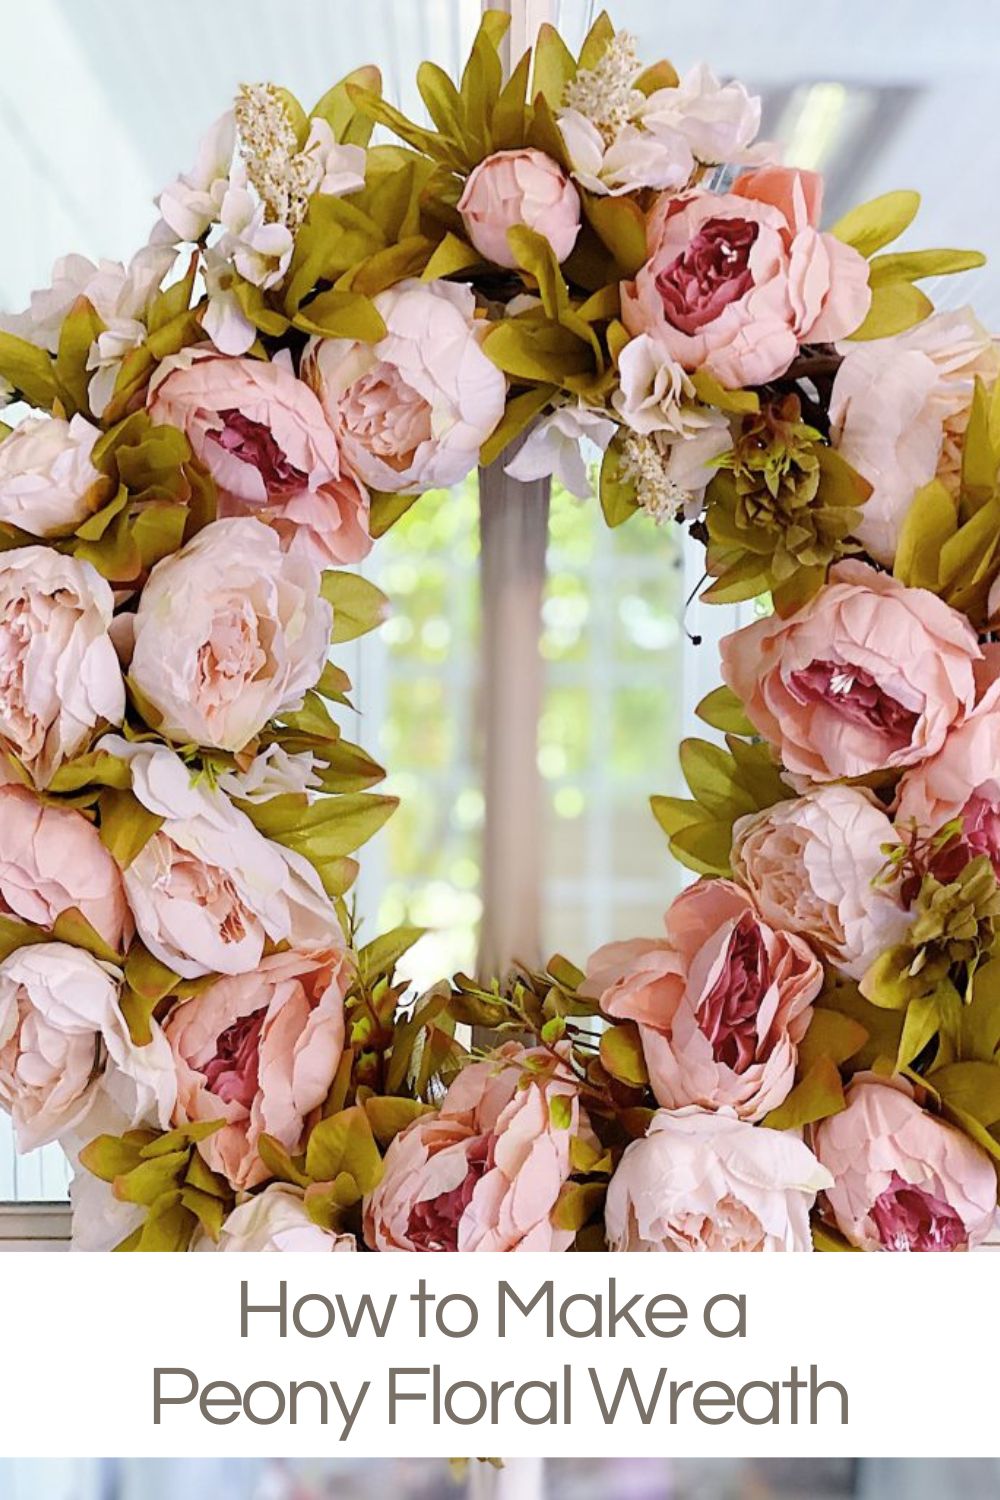 Spring is here in full bloom and today I am sharing an easy DIY How to Make a Peony Floral Wreath. Isn't it awesome?